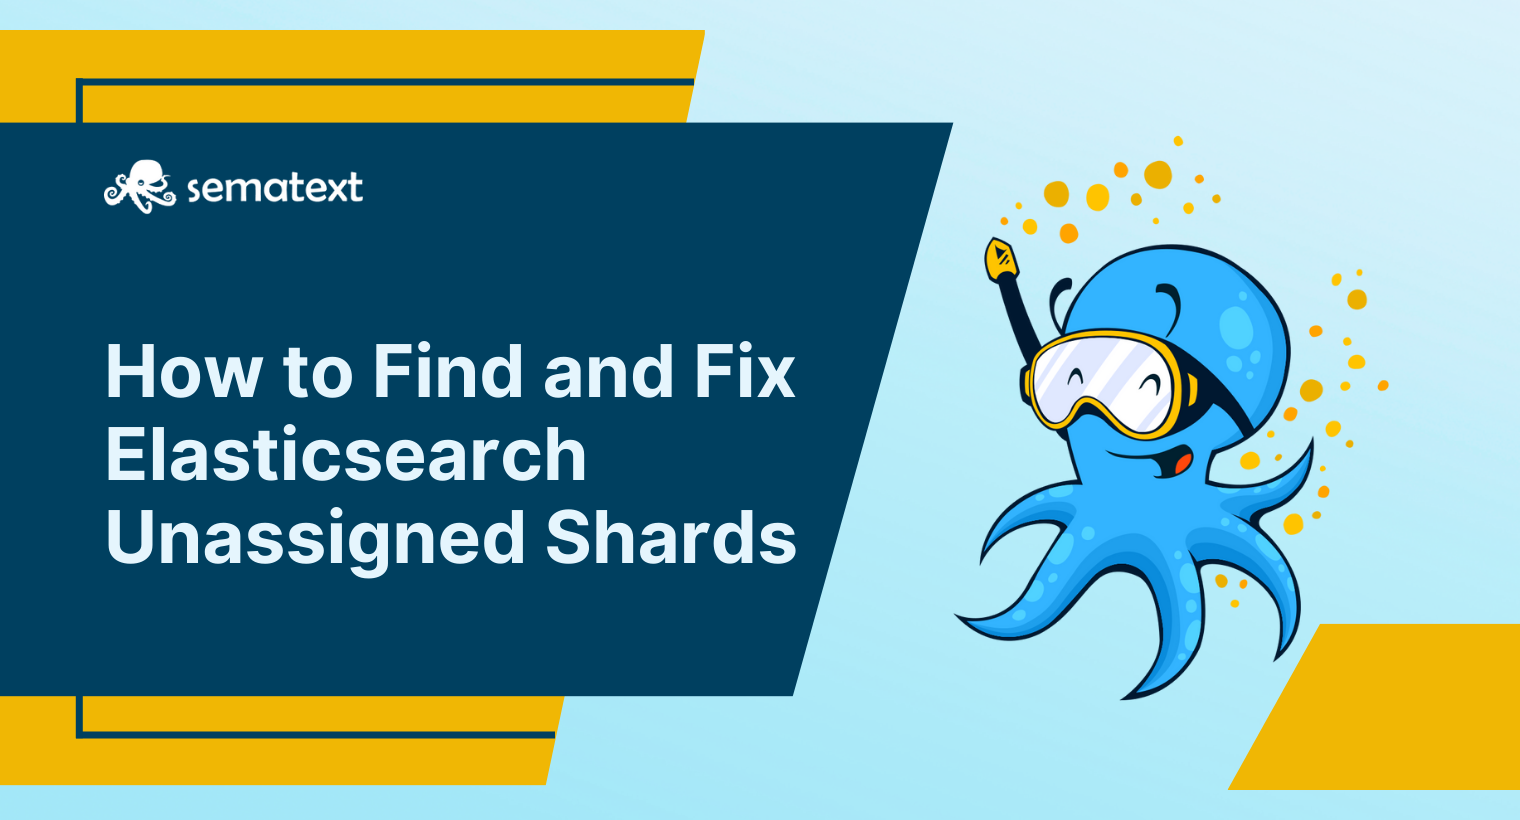 How to Find and Fix Elasticsearch Unassigned Shards